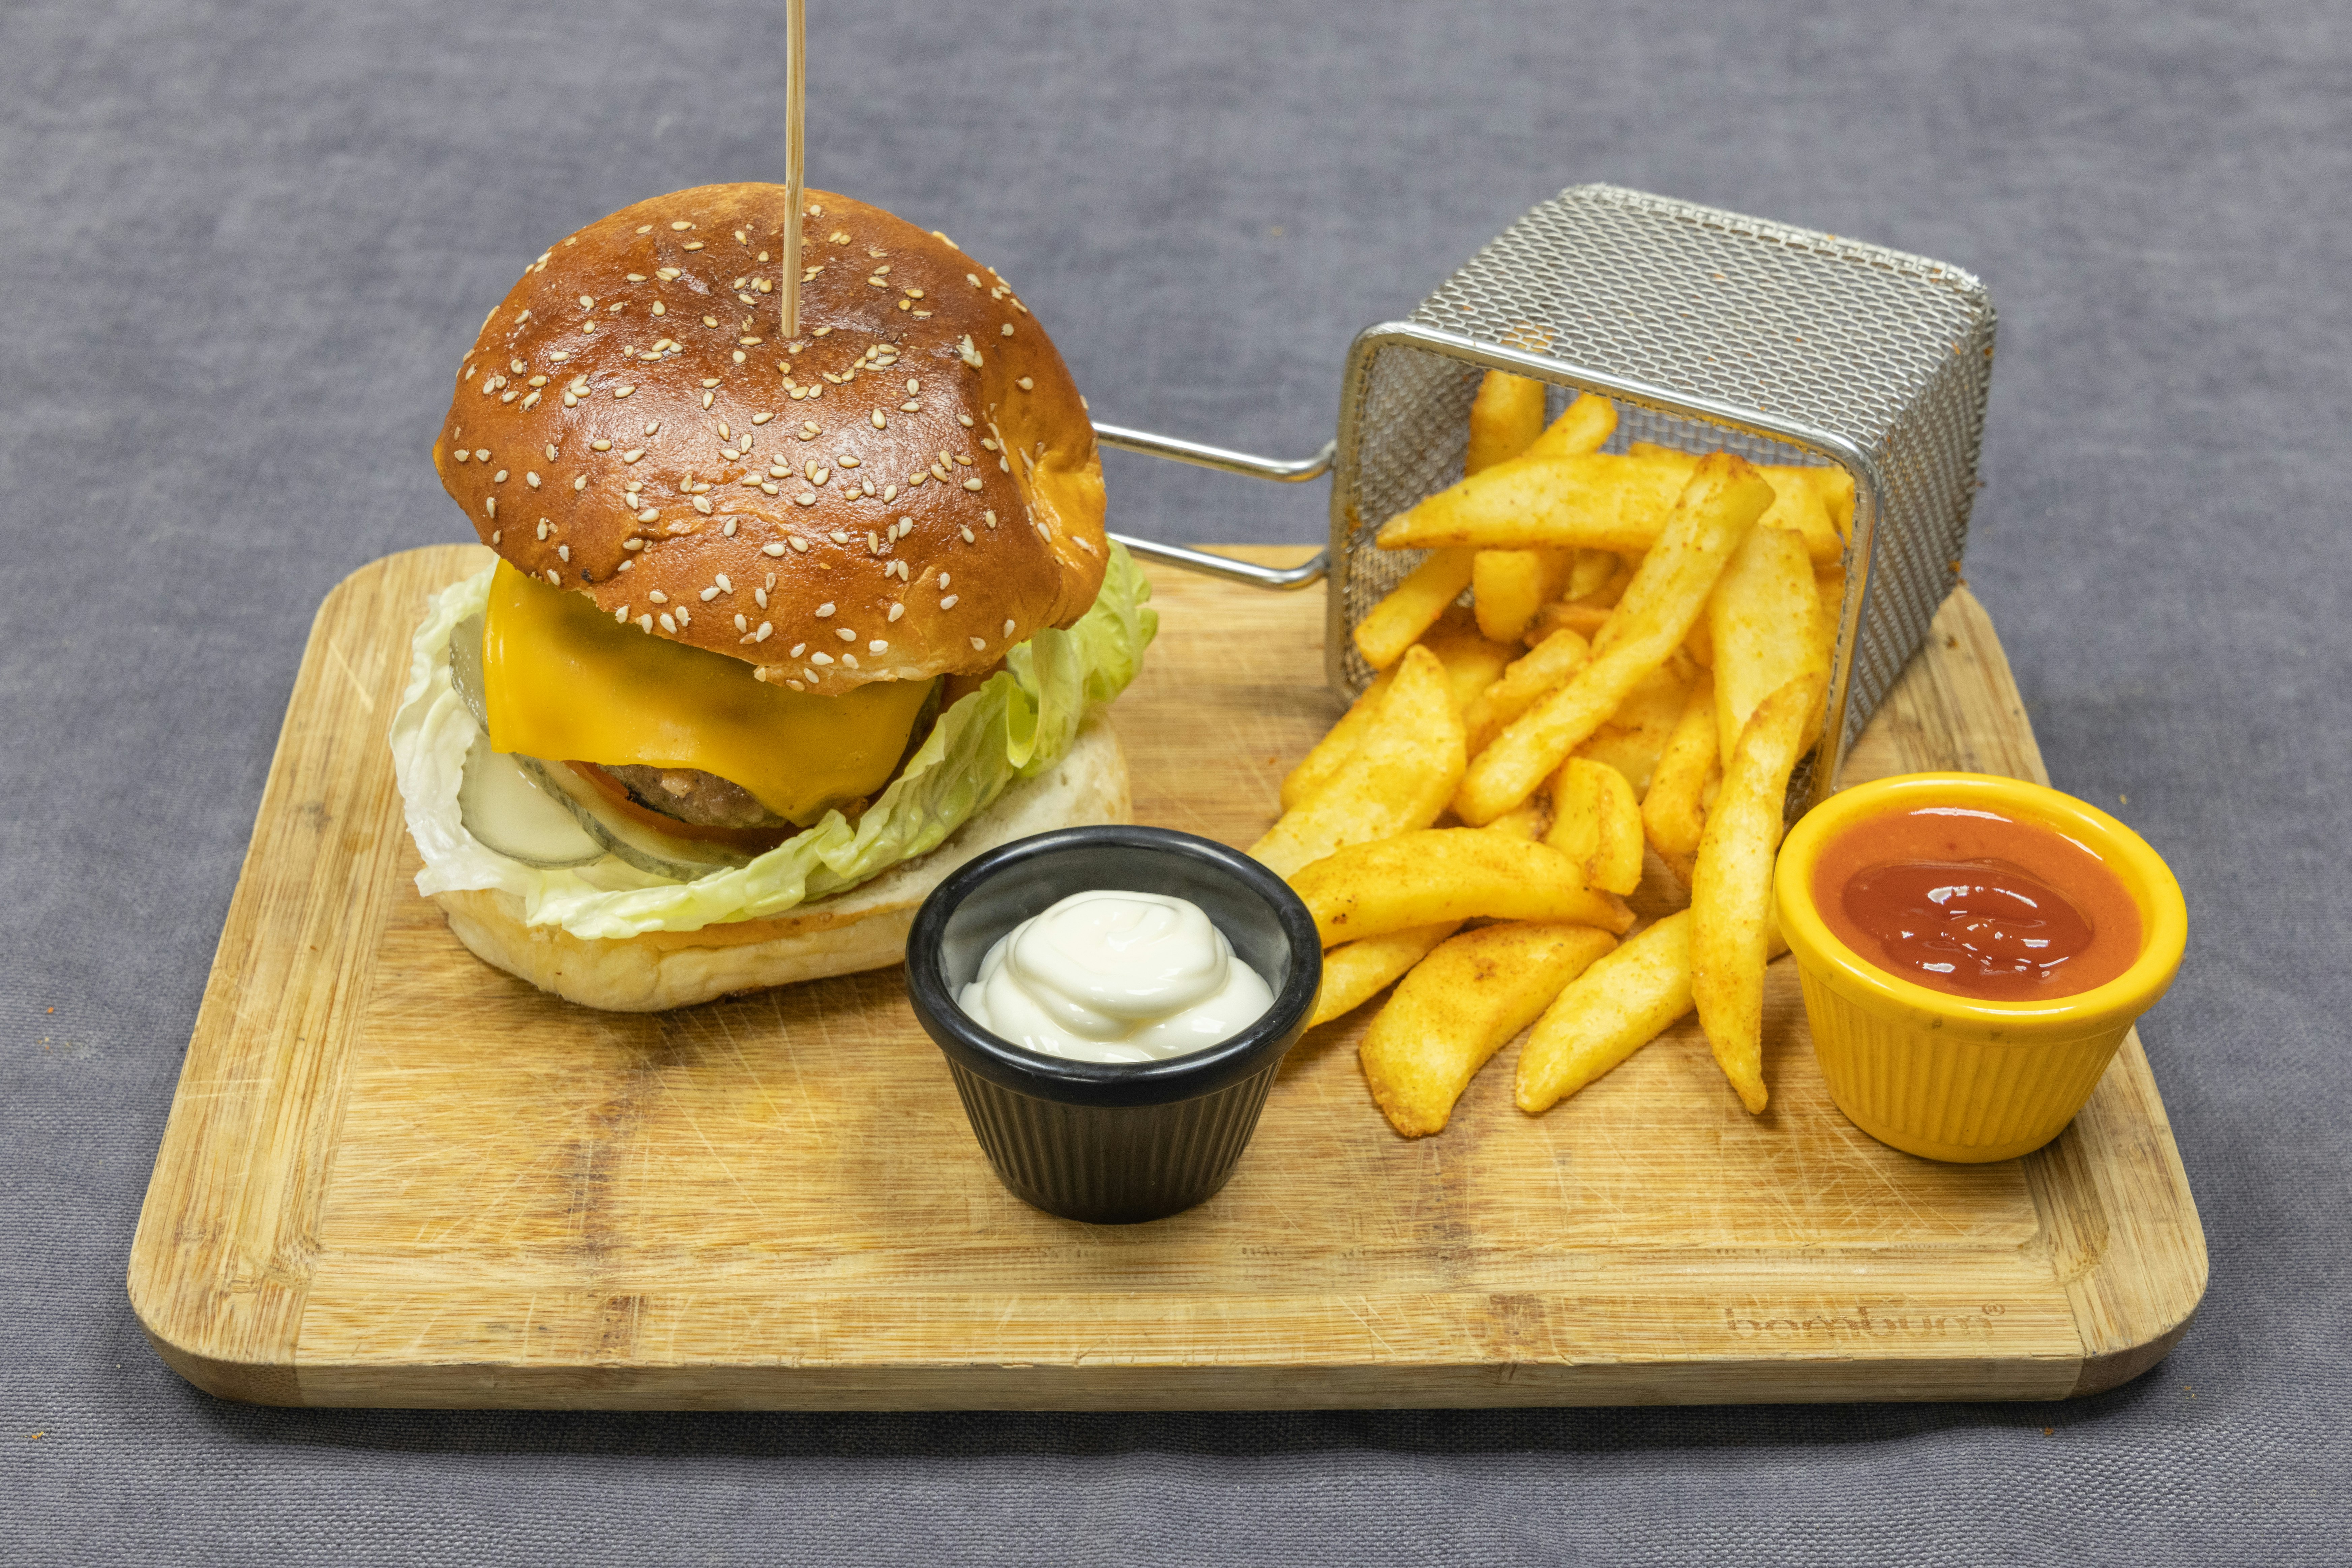 burger and fries on brown wooden chopping board